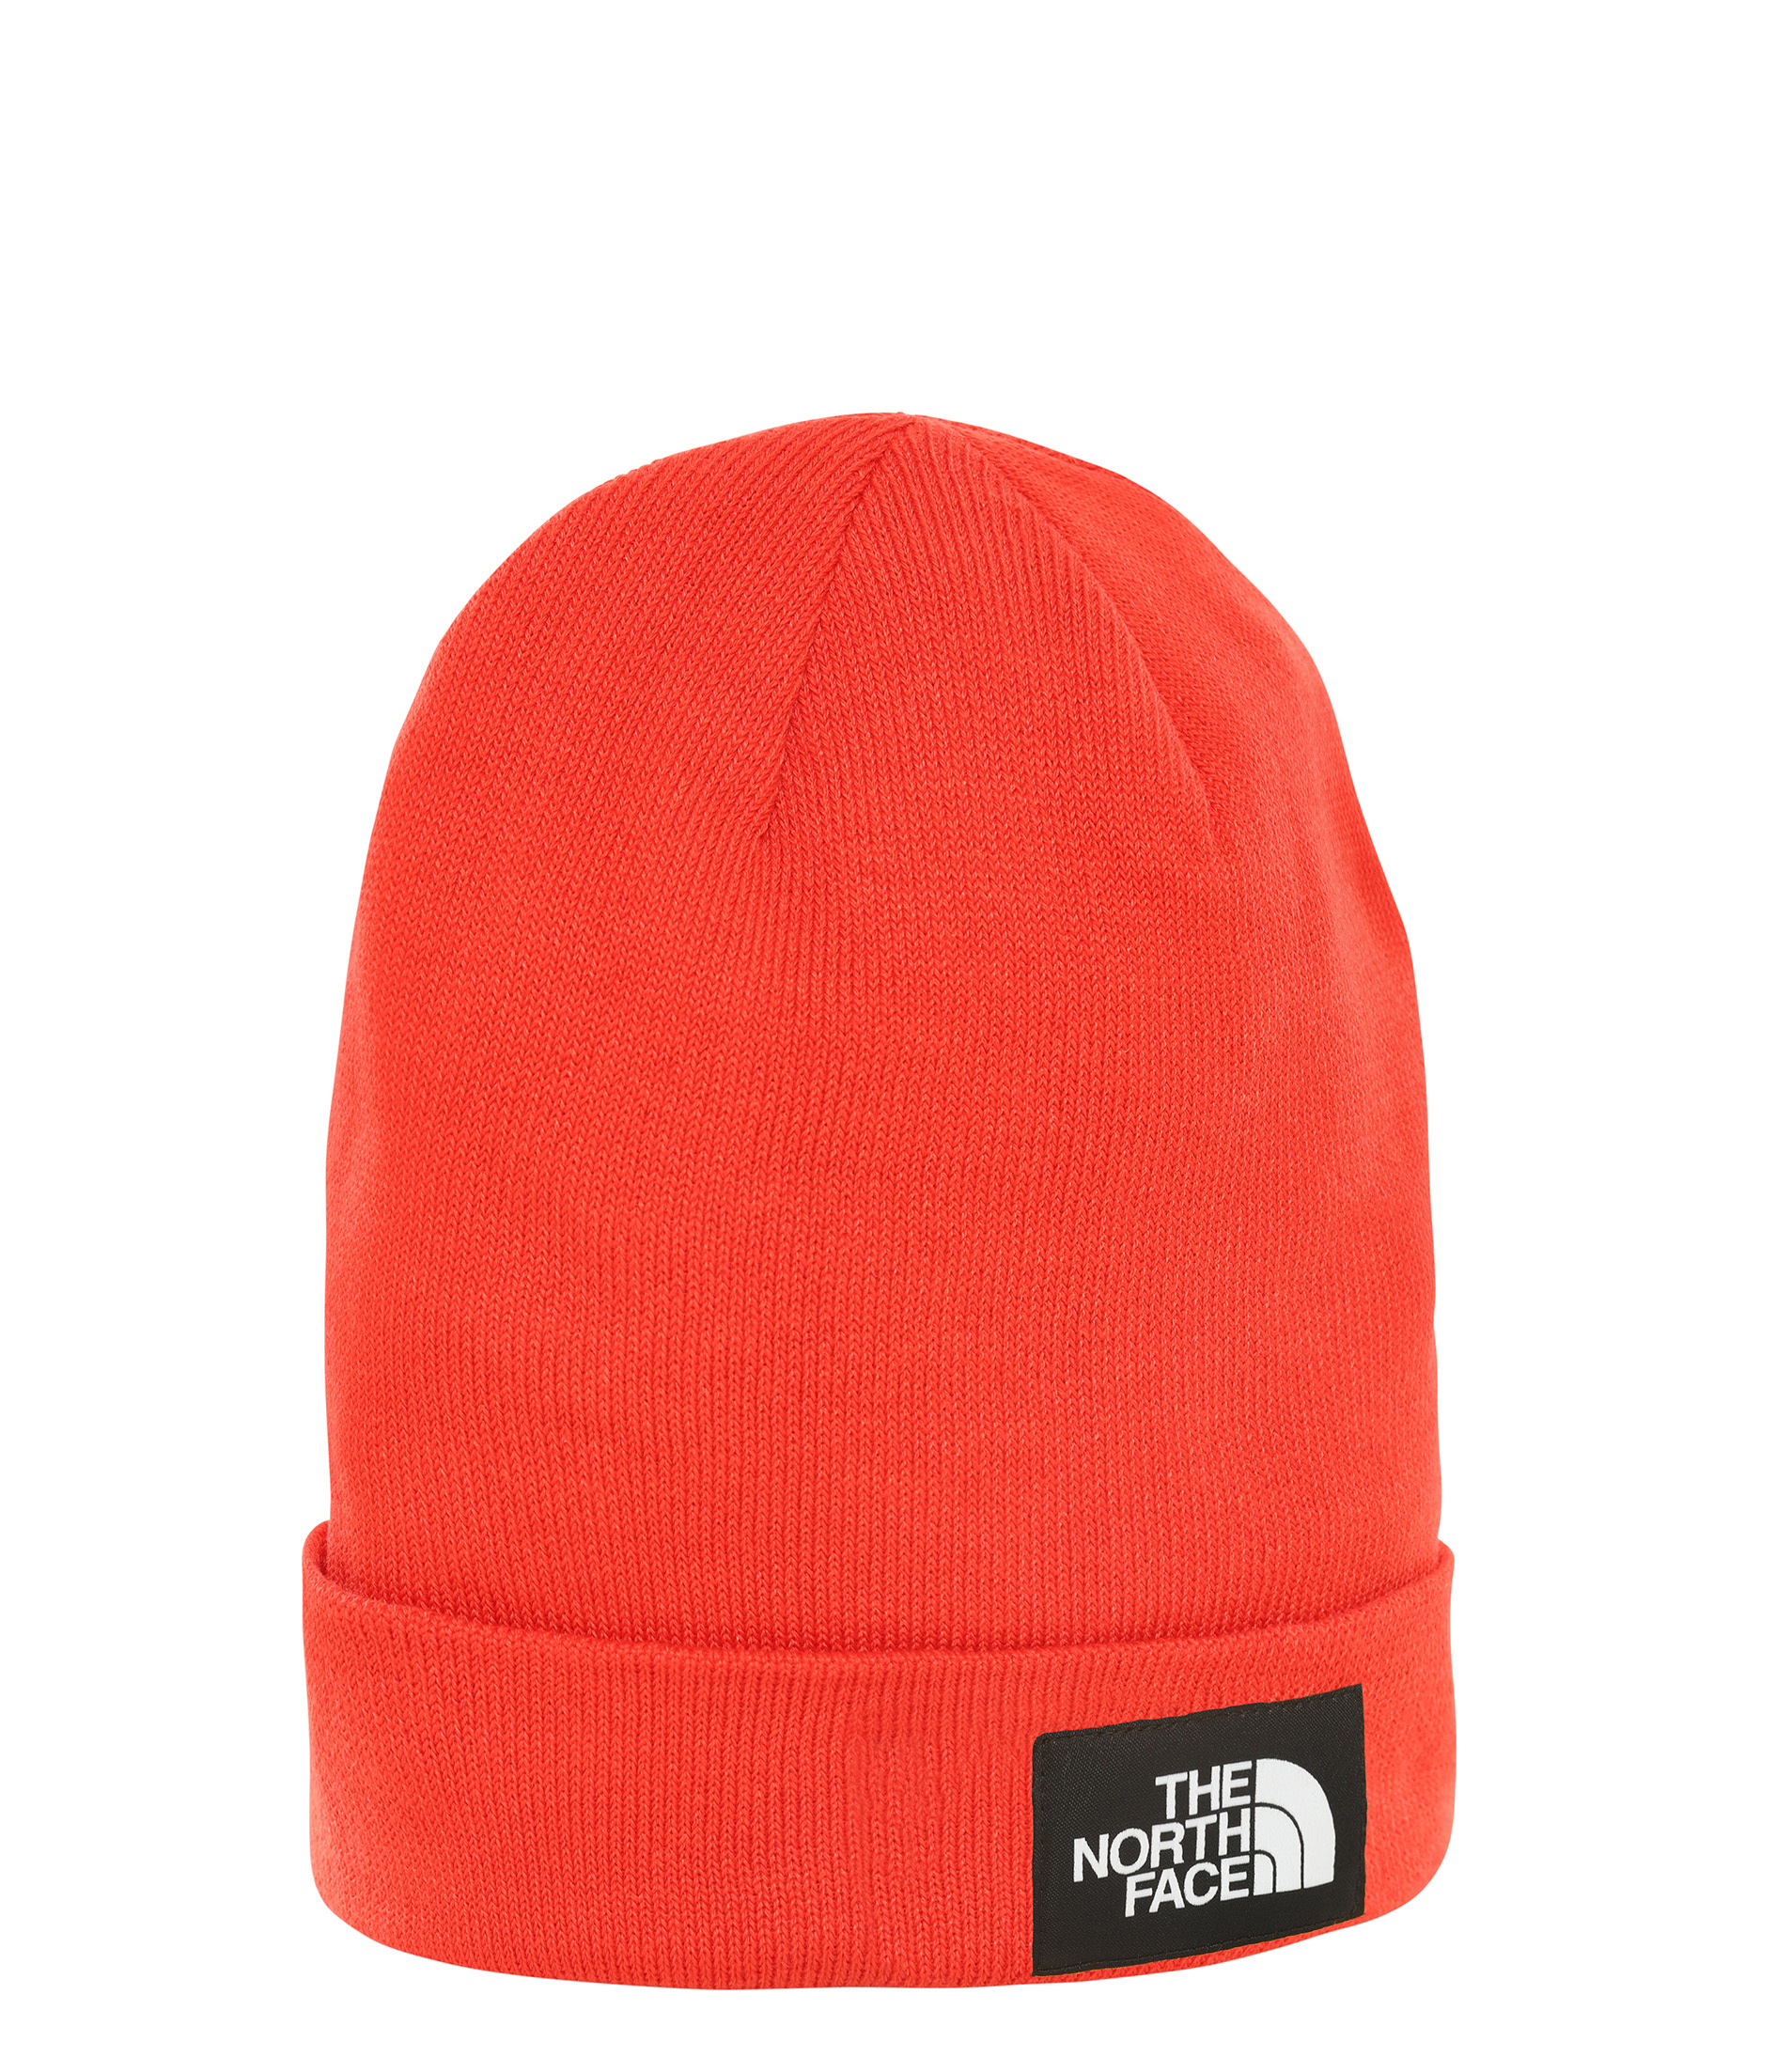 The North Face Dock Worker Recycled Beanie Muts